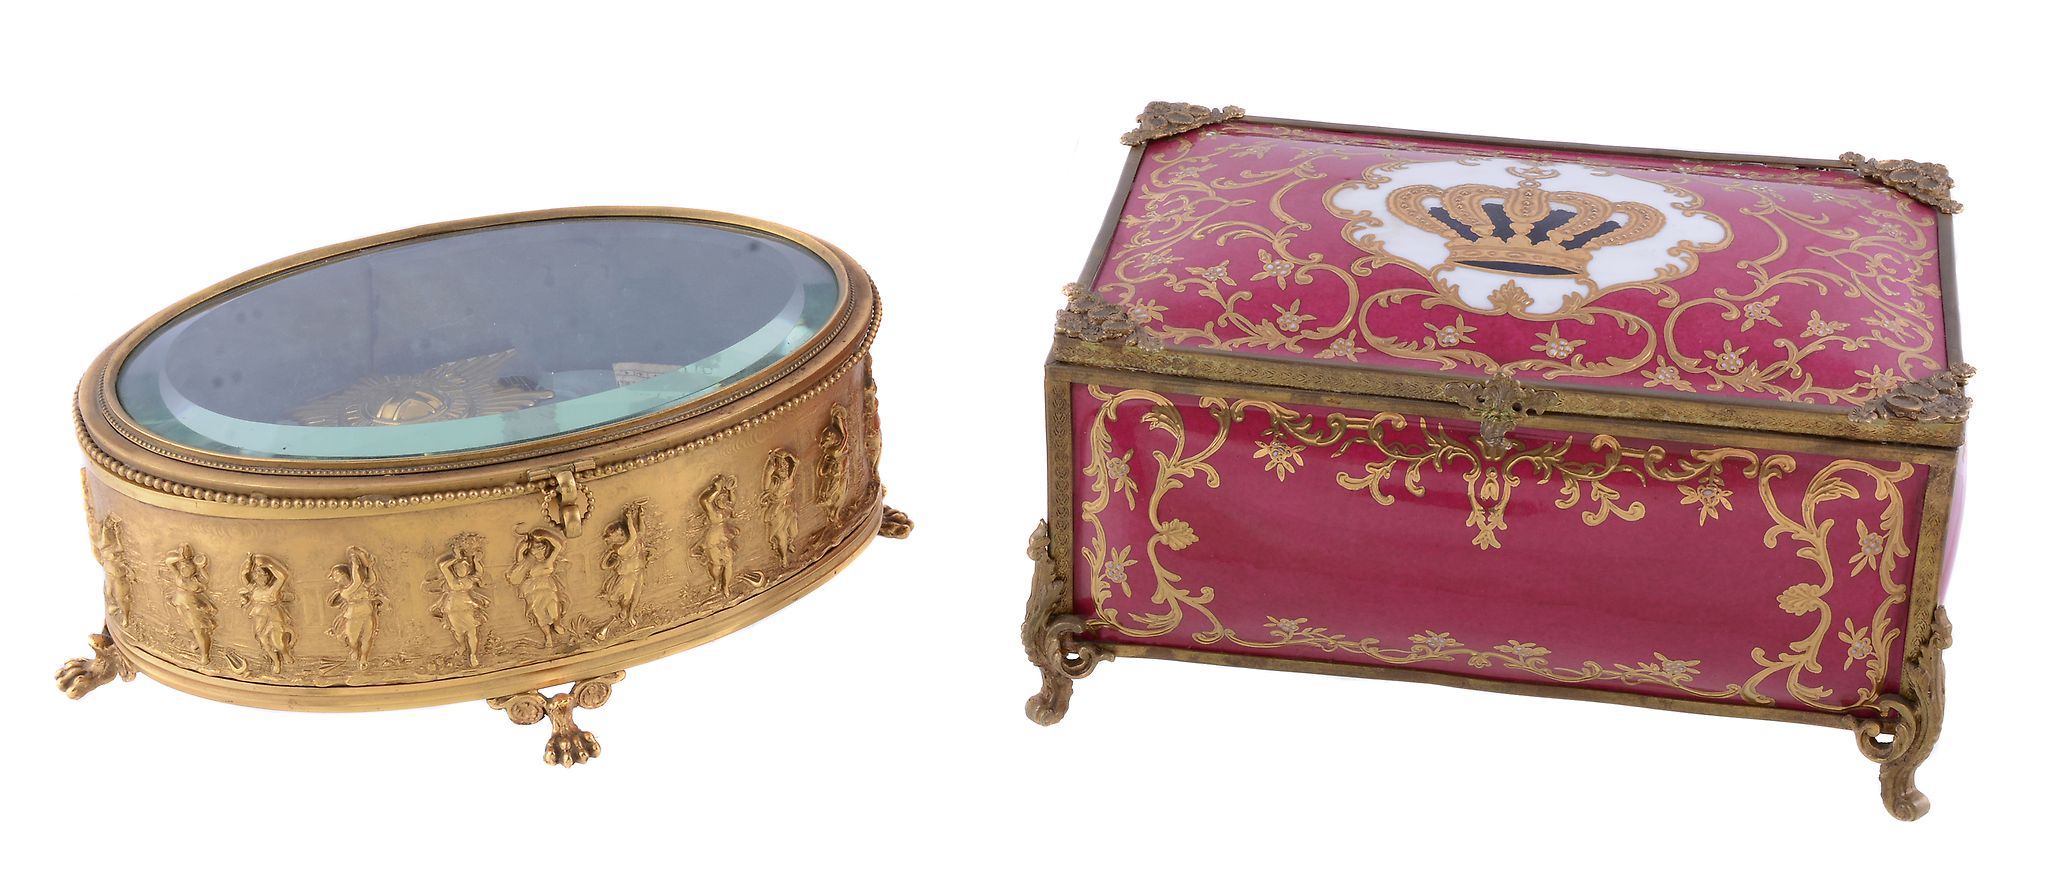 A Continental gilt-metal and glass oval casket, early 20th century, stamped with a frieze of dancing